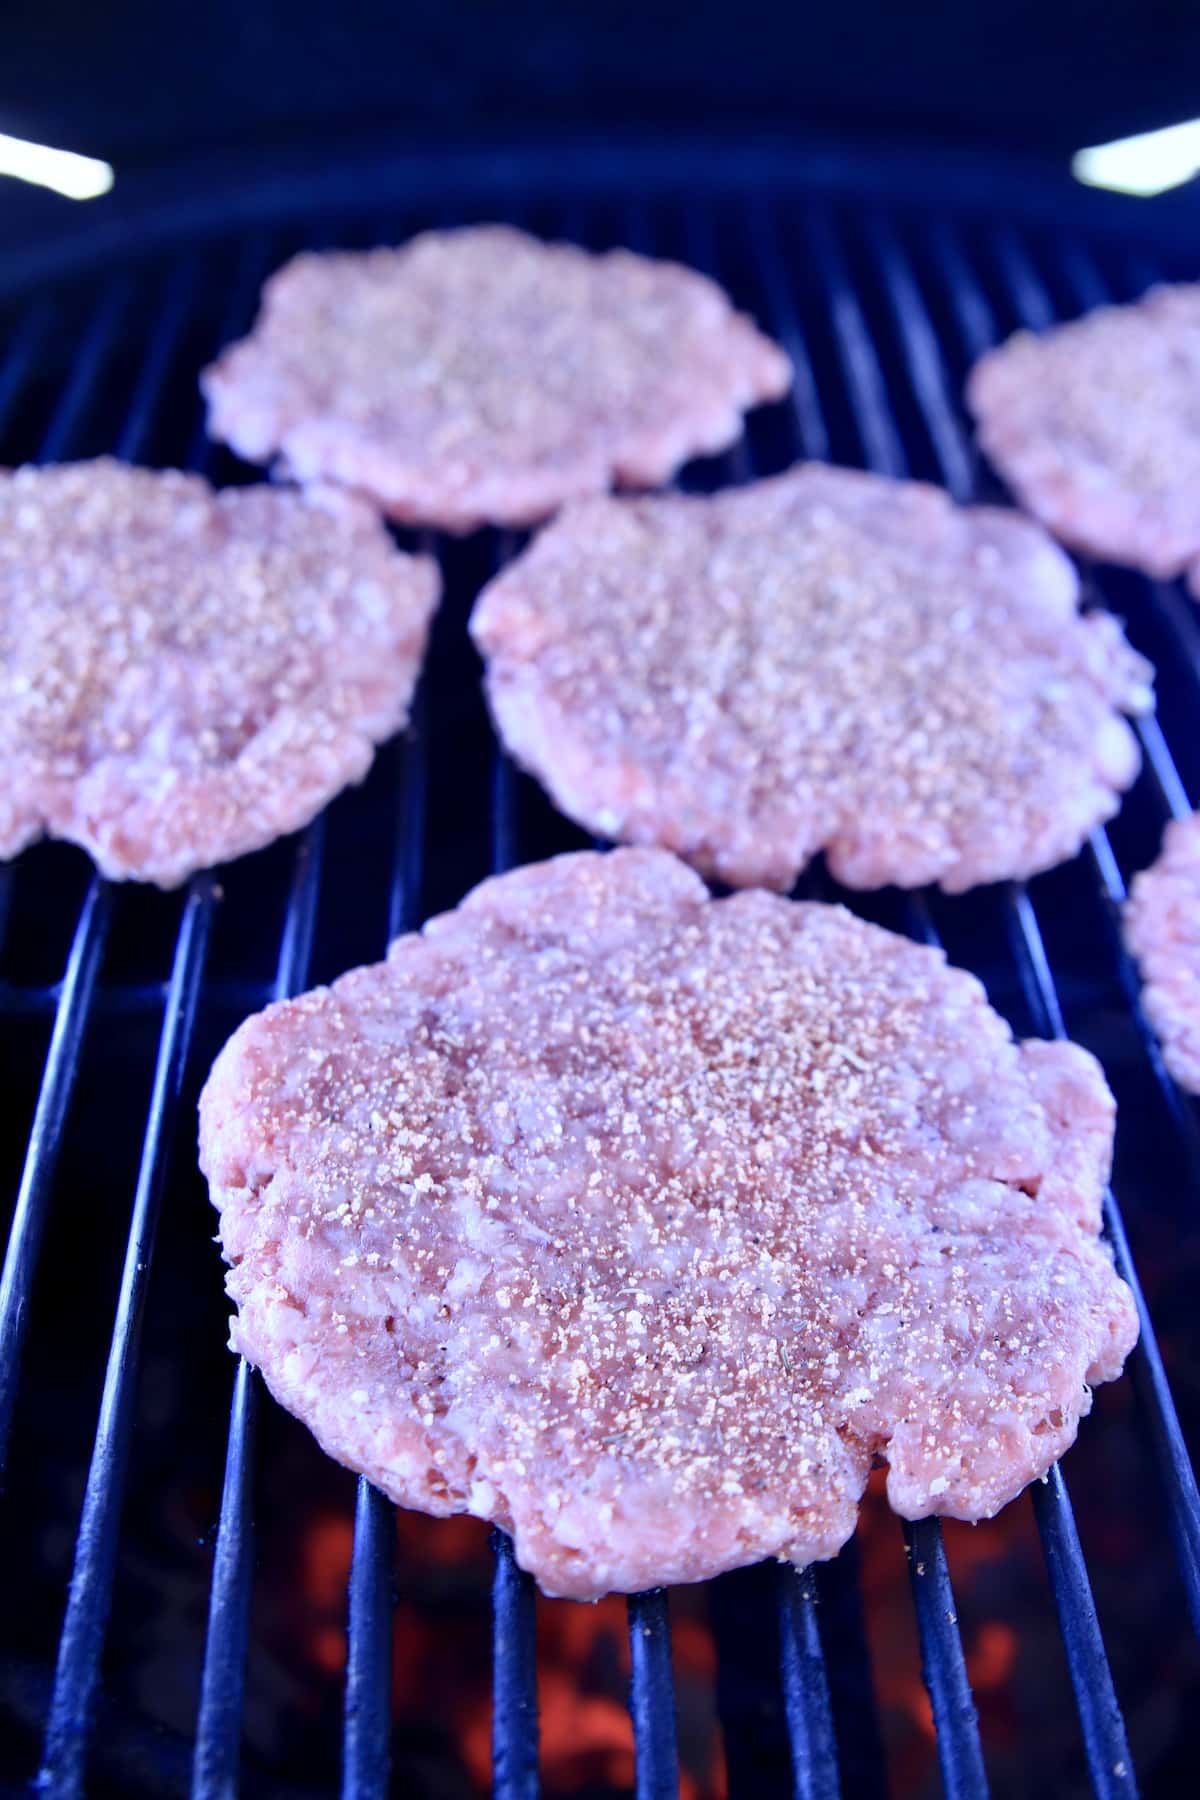 Burger patties on a grill.